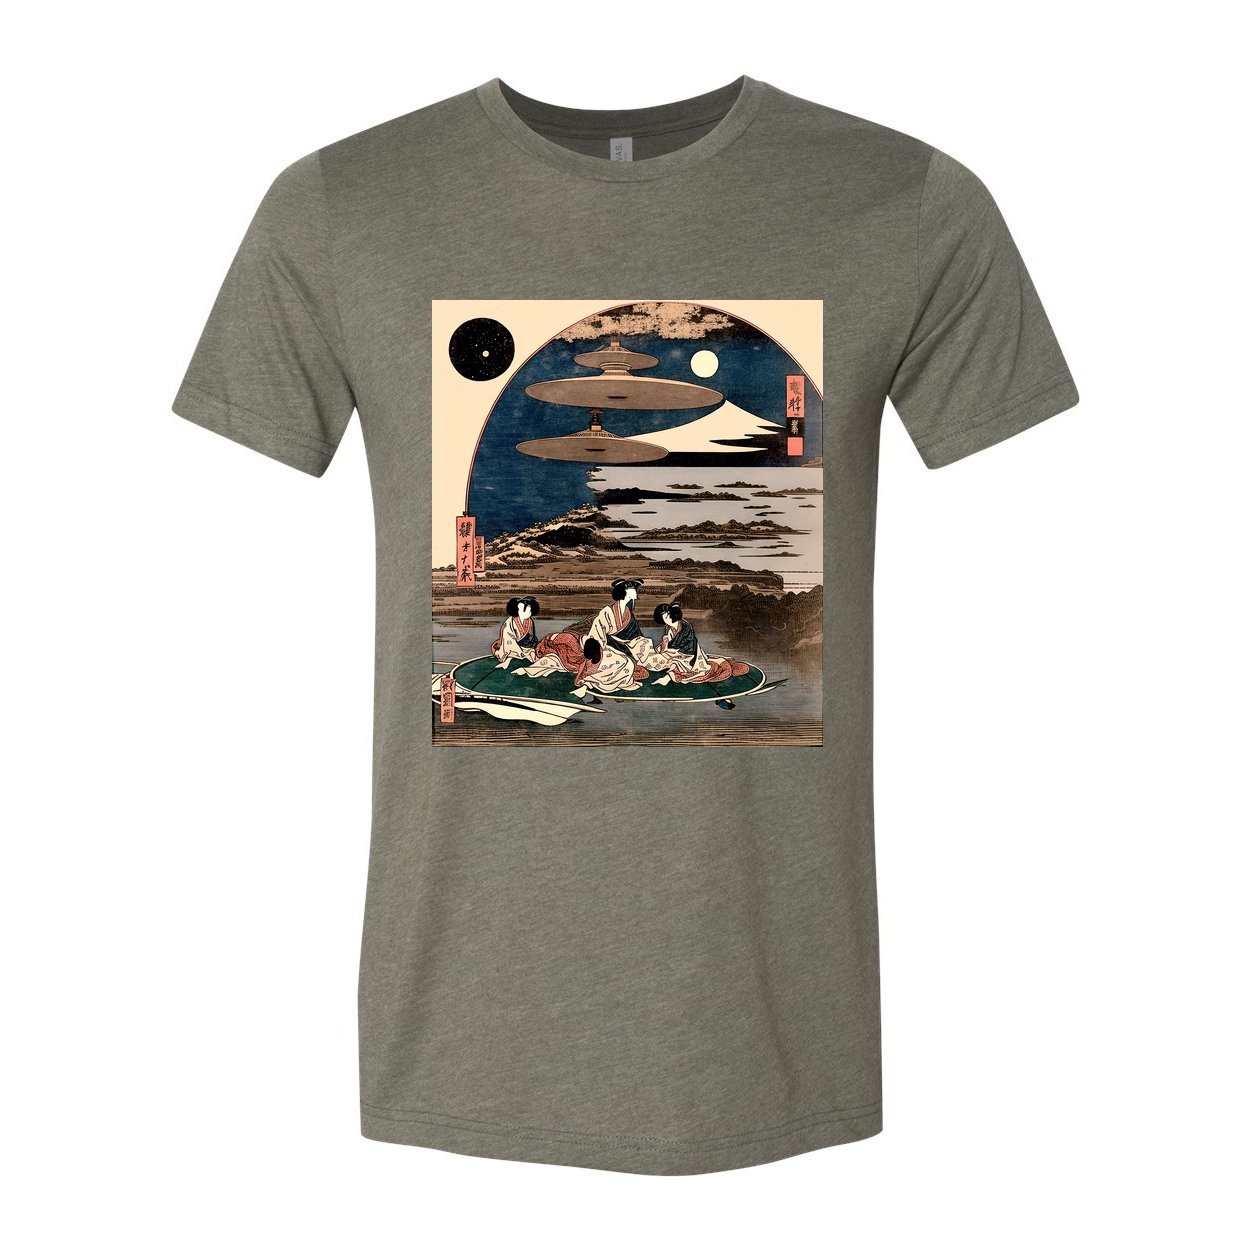 T-Shirts XS / Heather Military Green UFO Space Alien Invasion | Extraterrestrial Vintage Ukiyo-e 19th-Century Surreal Graphic Art T-Shirt